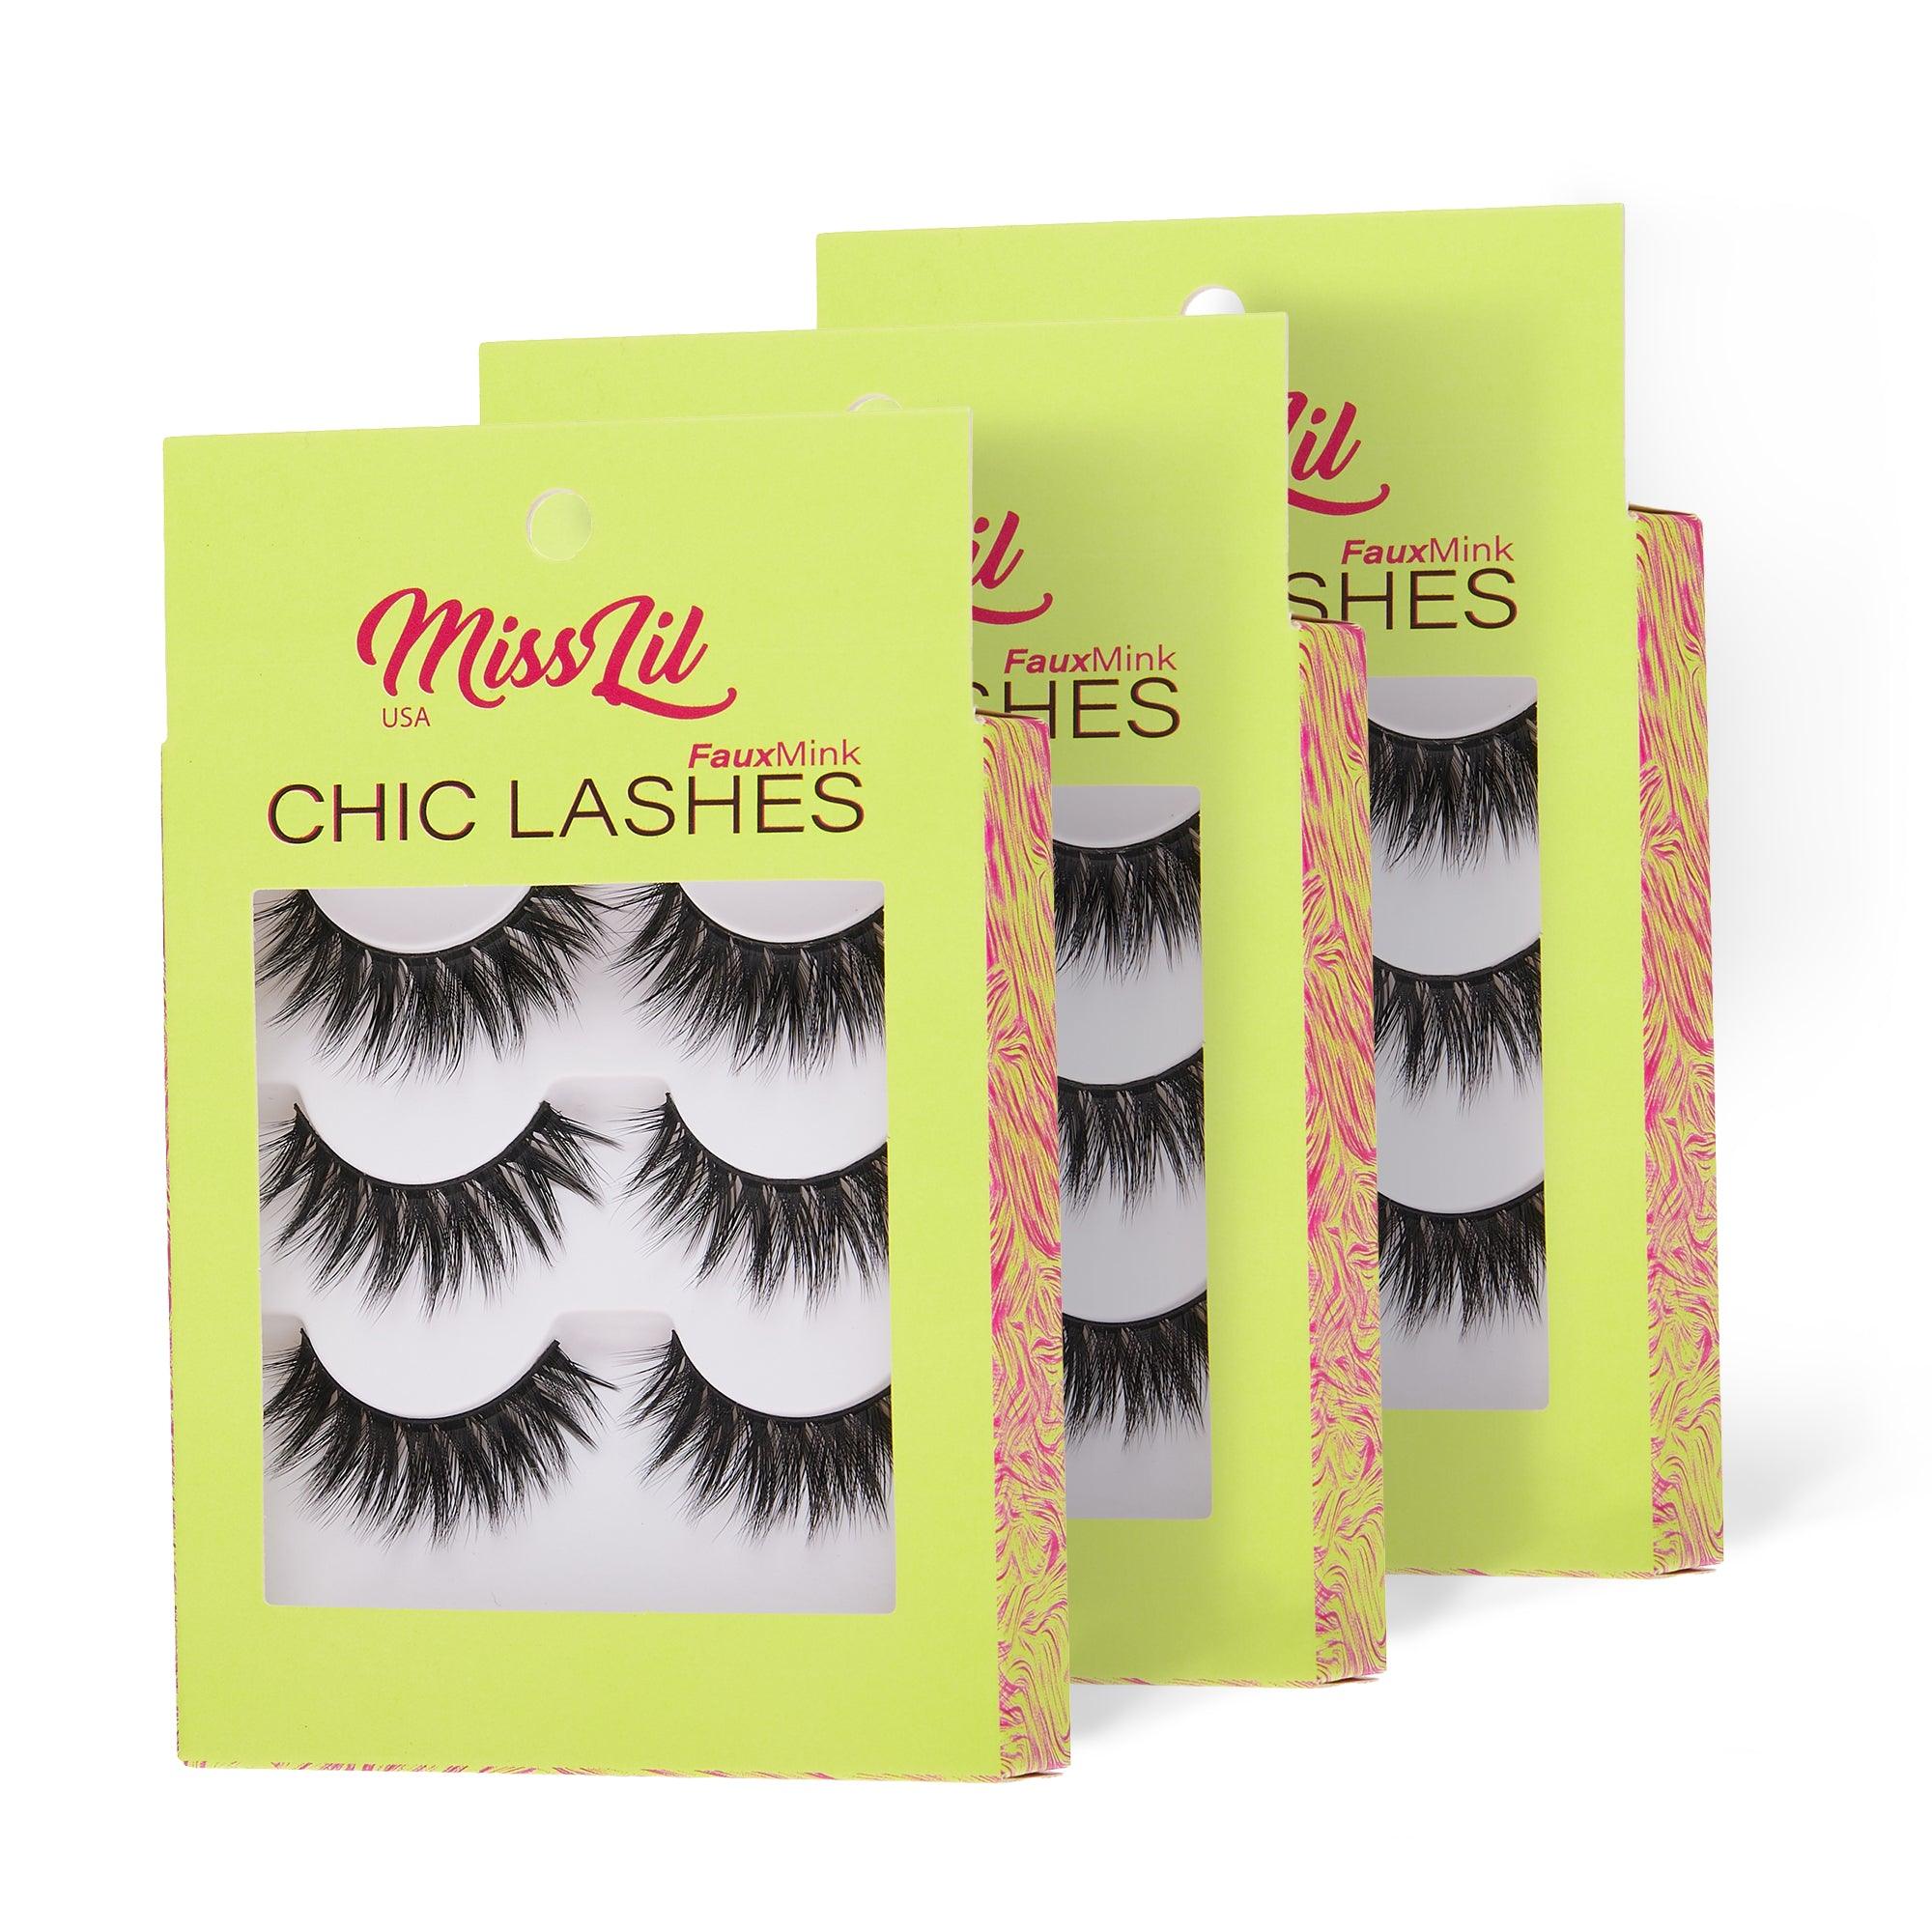 3-Pair Faux Mink Eyelashes - Chic Lashes Collection #11 - Pack of 3 - Miss Lil USA